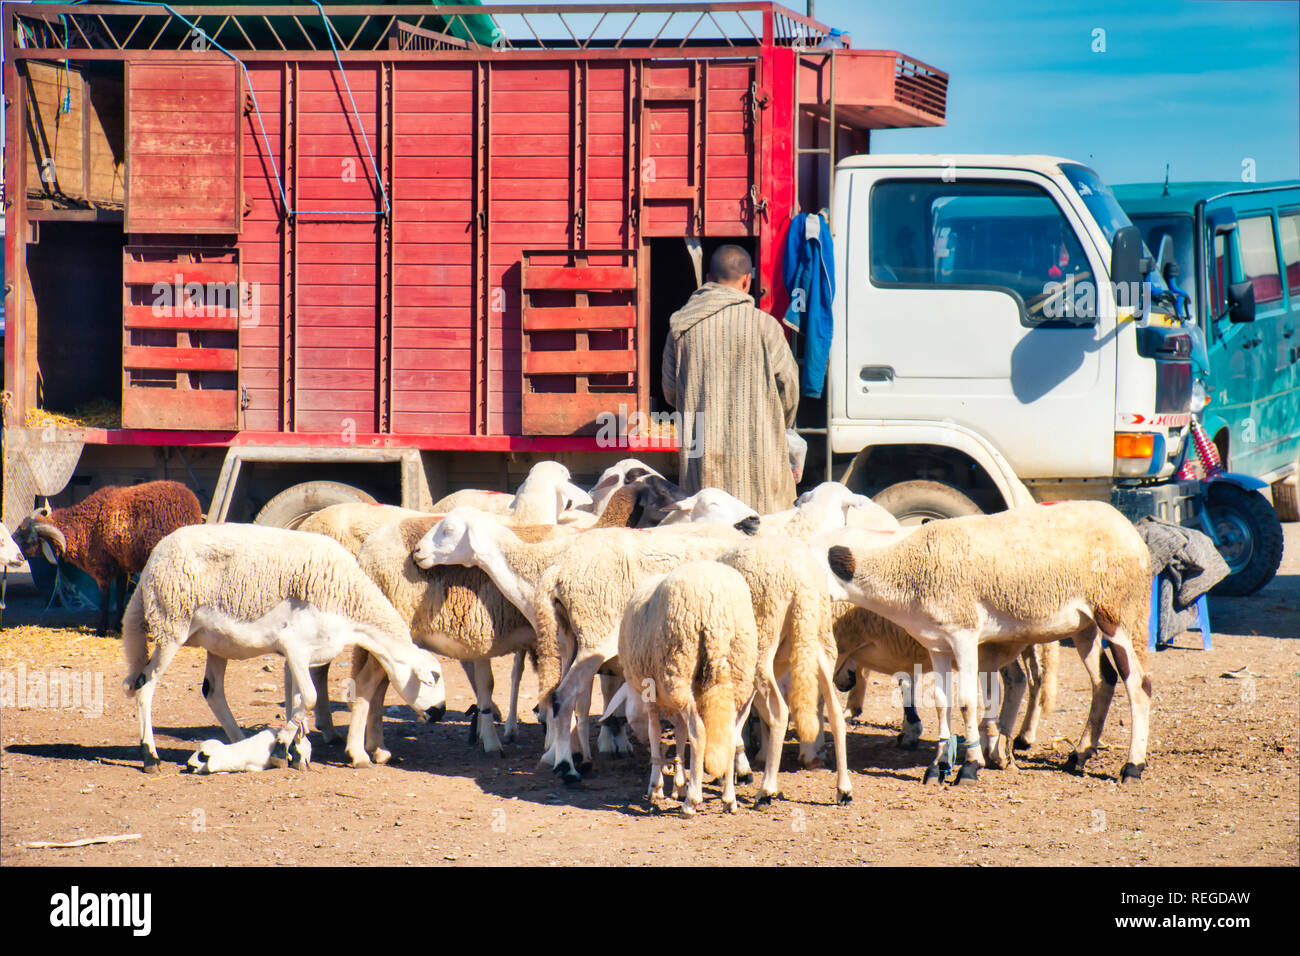 Oued Laou, Chefchaouen, Morocco - November 03, 2018: A man has brought his flock of sheep in his truck to sell at the outdoor market in Oued Laou Stock Photo